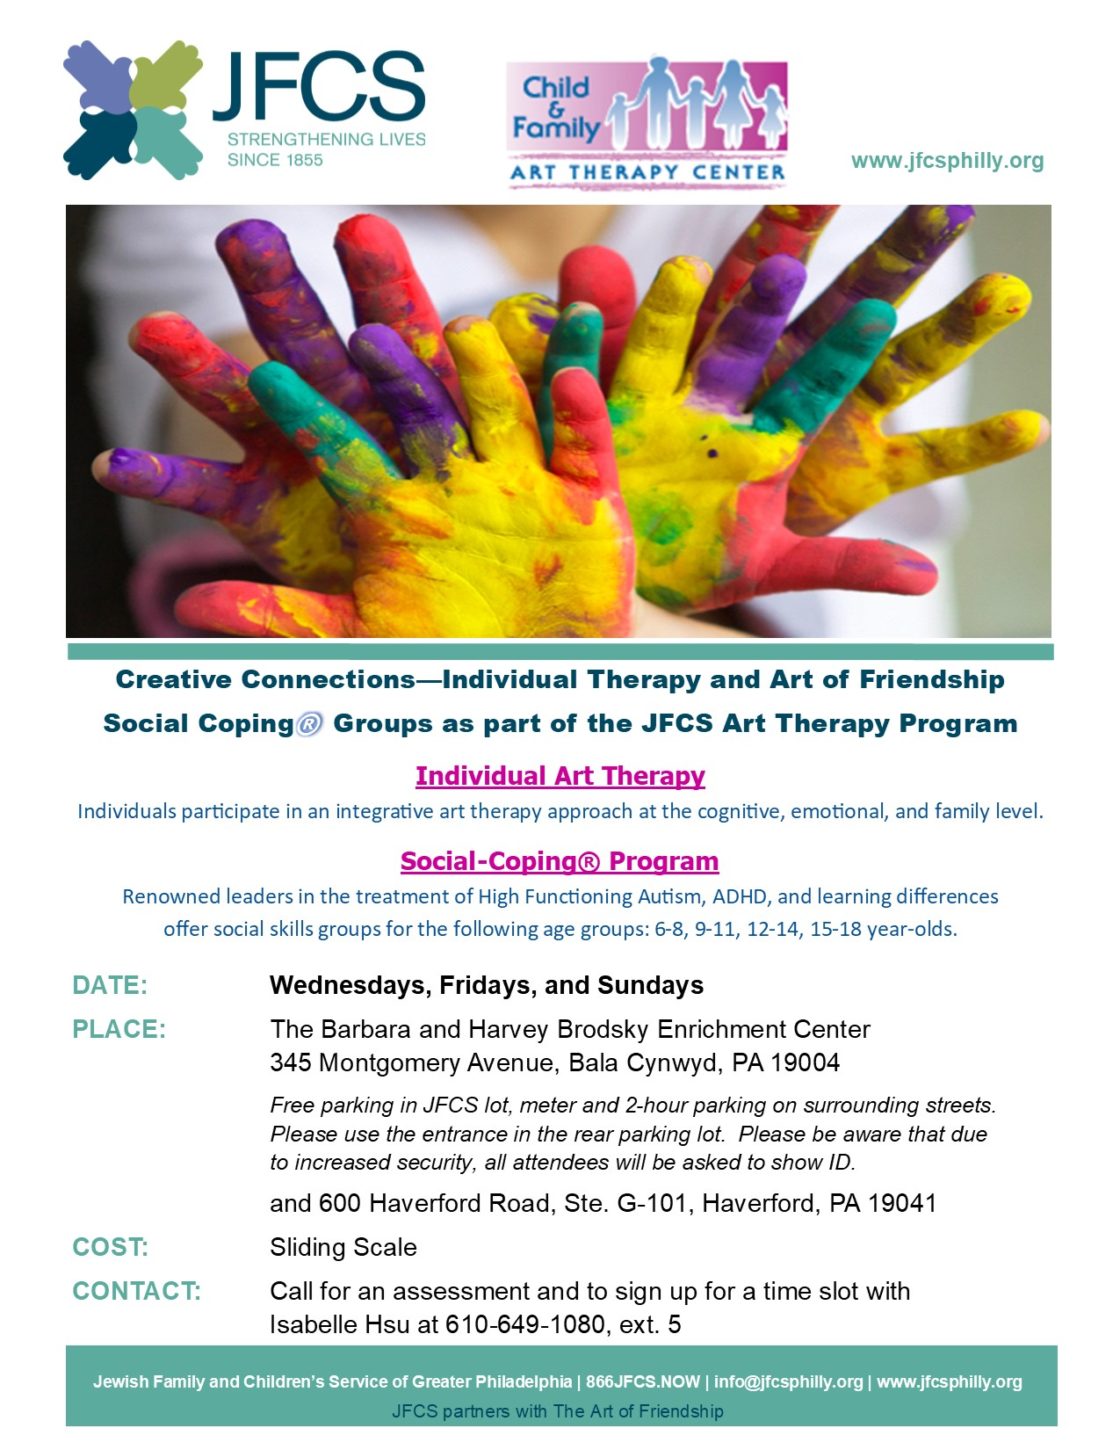 JFCS – Individual Art Therapy and Social-Coping Program